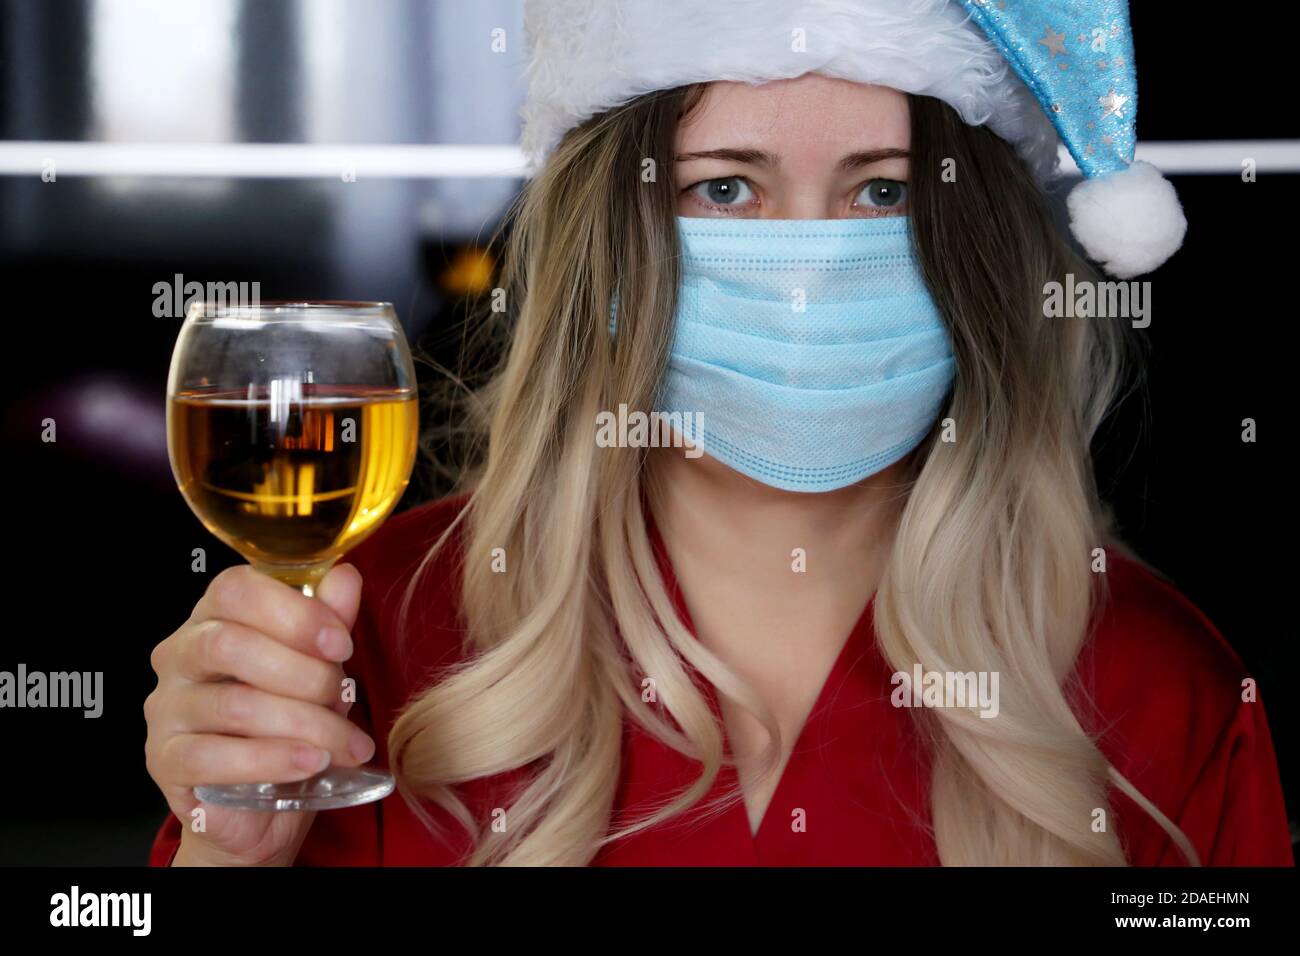 Woman in medical face mask and Santa Claus hat with glass of wine in hand. Christmas celebration during coronavirus pandemic Stock Photo